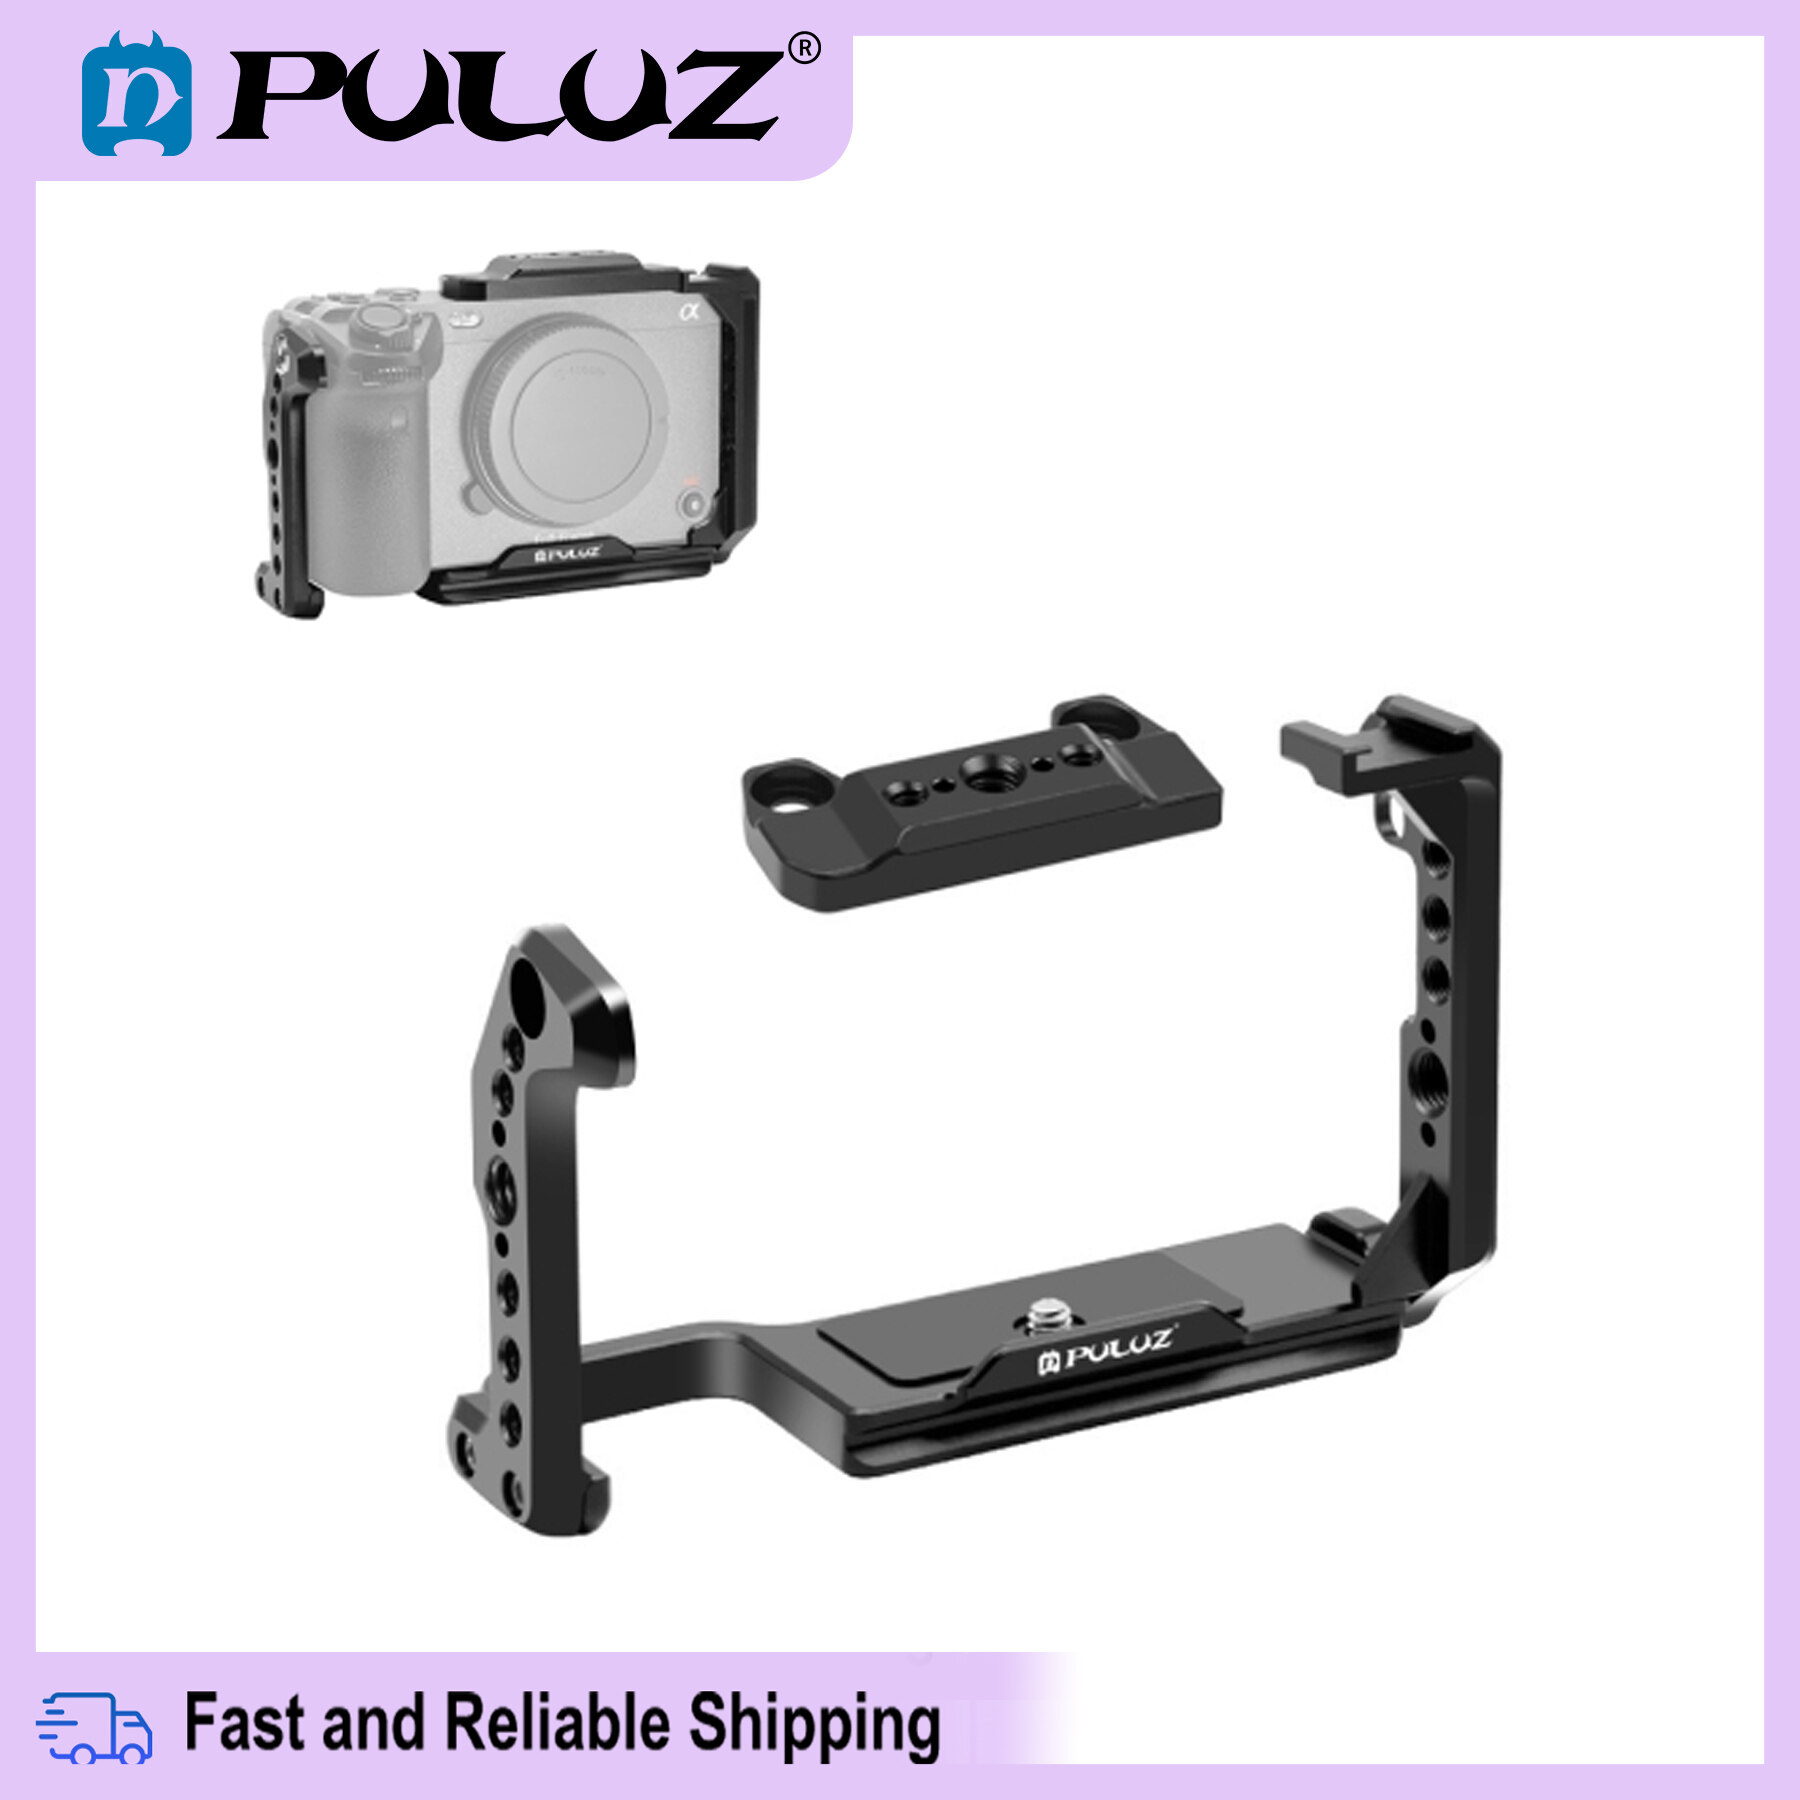 Ready Stock For Sony ILME-FX30 FX3 PULUZ Metal Camera Cage Stabilizer Rig